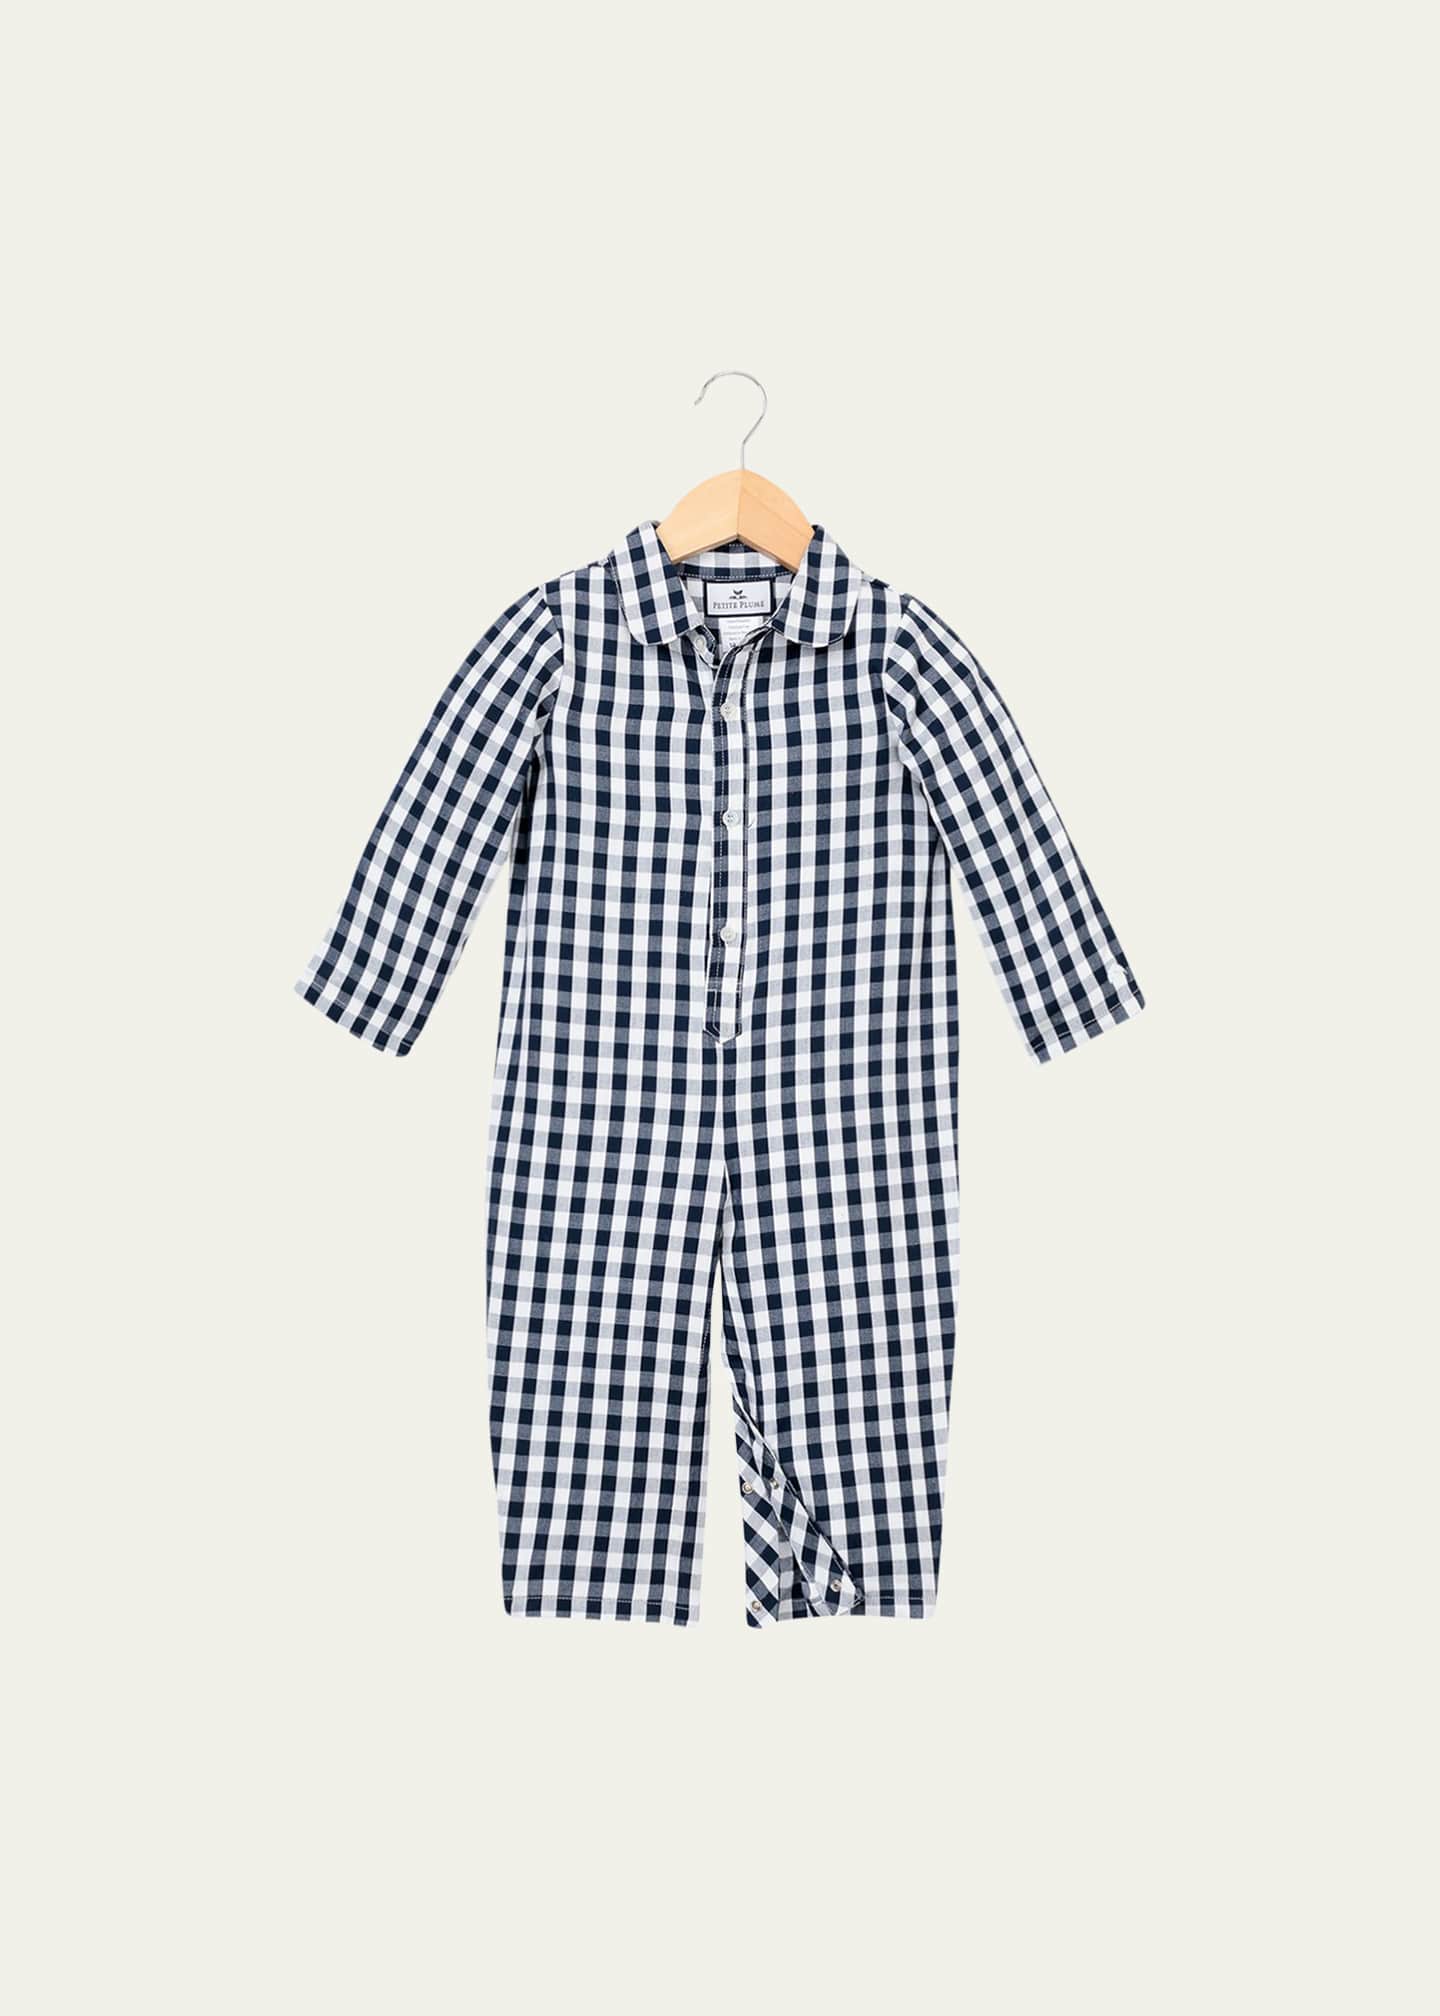 Petite Plume Gingham Coverall, Size 0-24 Months Image 1 of 2